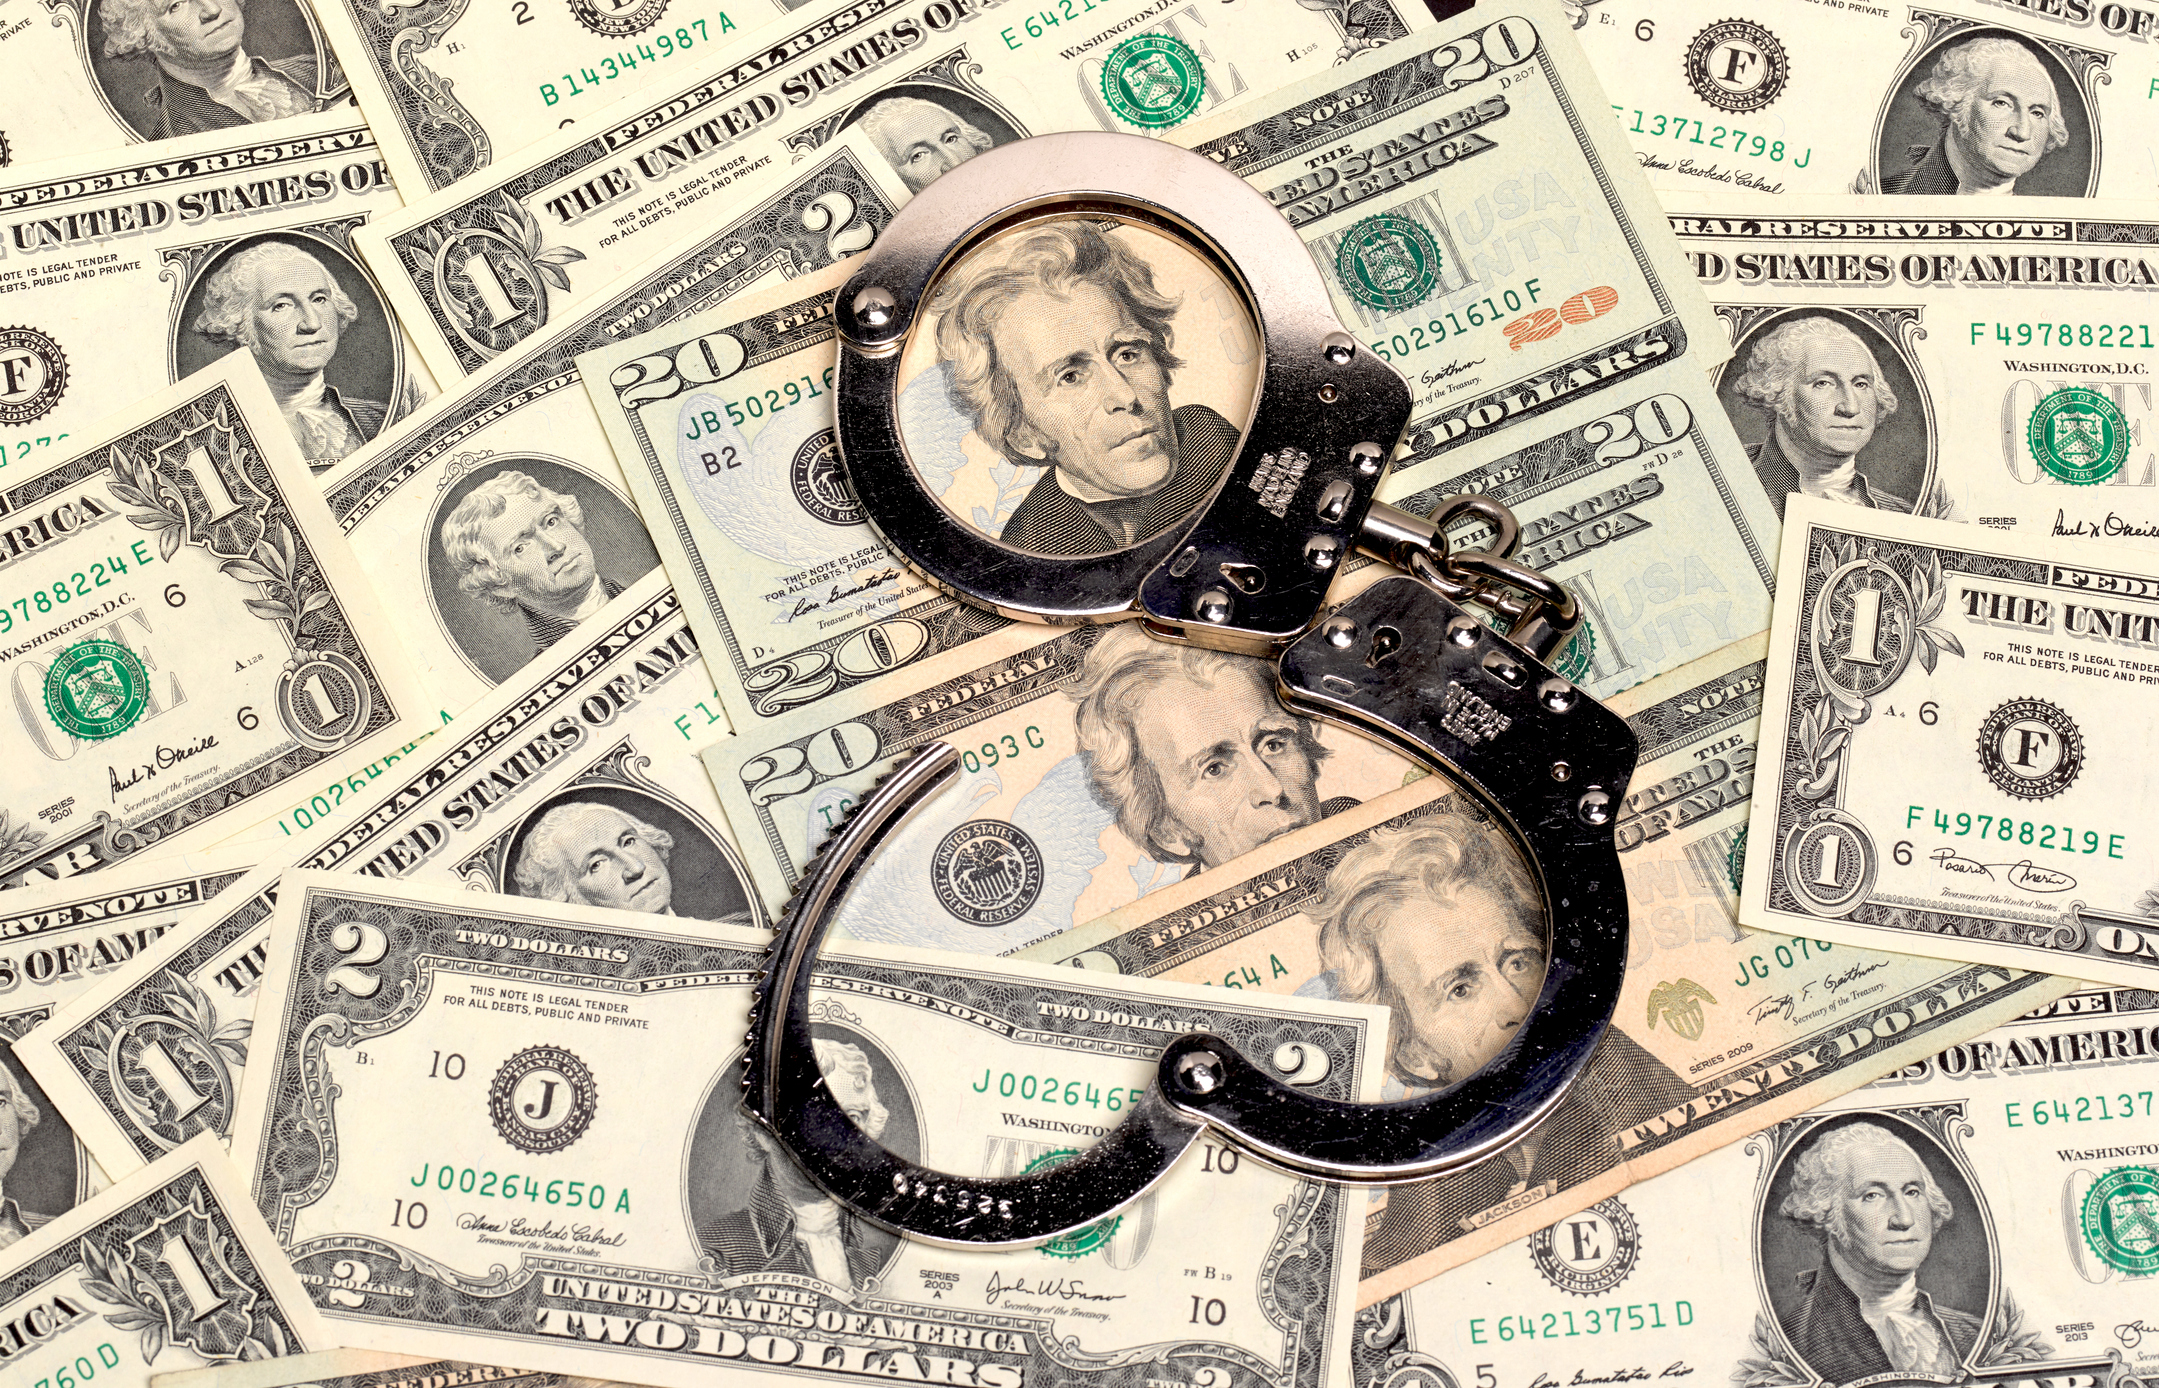 handcuffs sitting on top of US paper currency